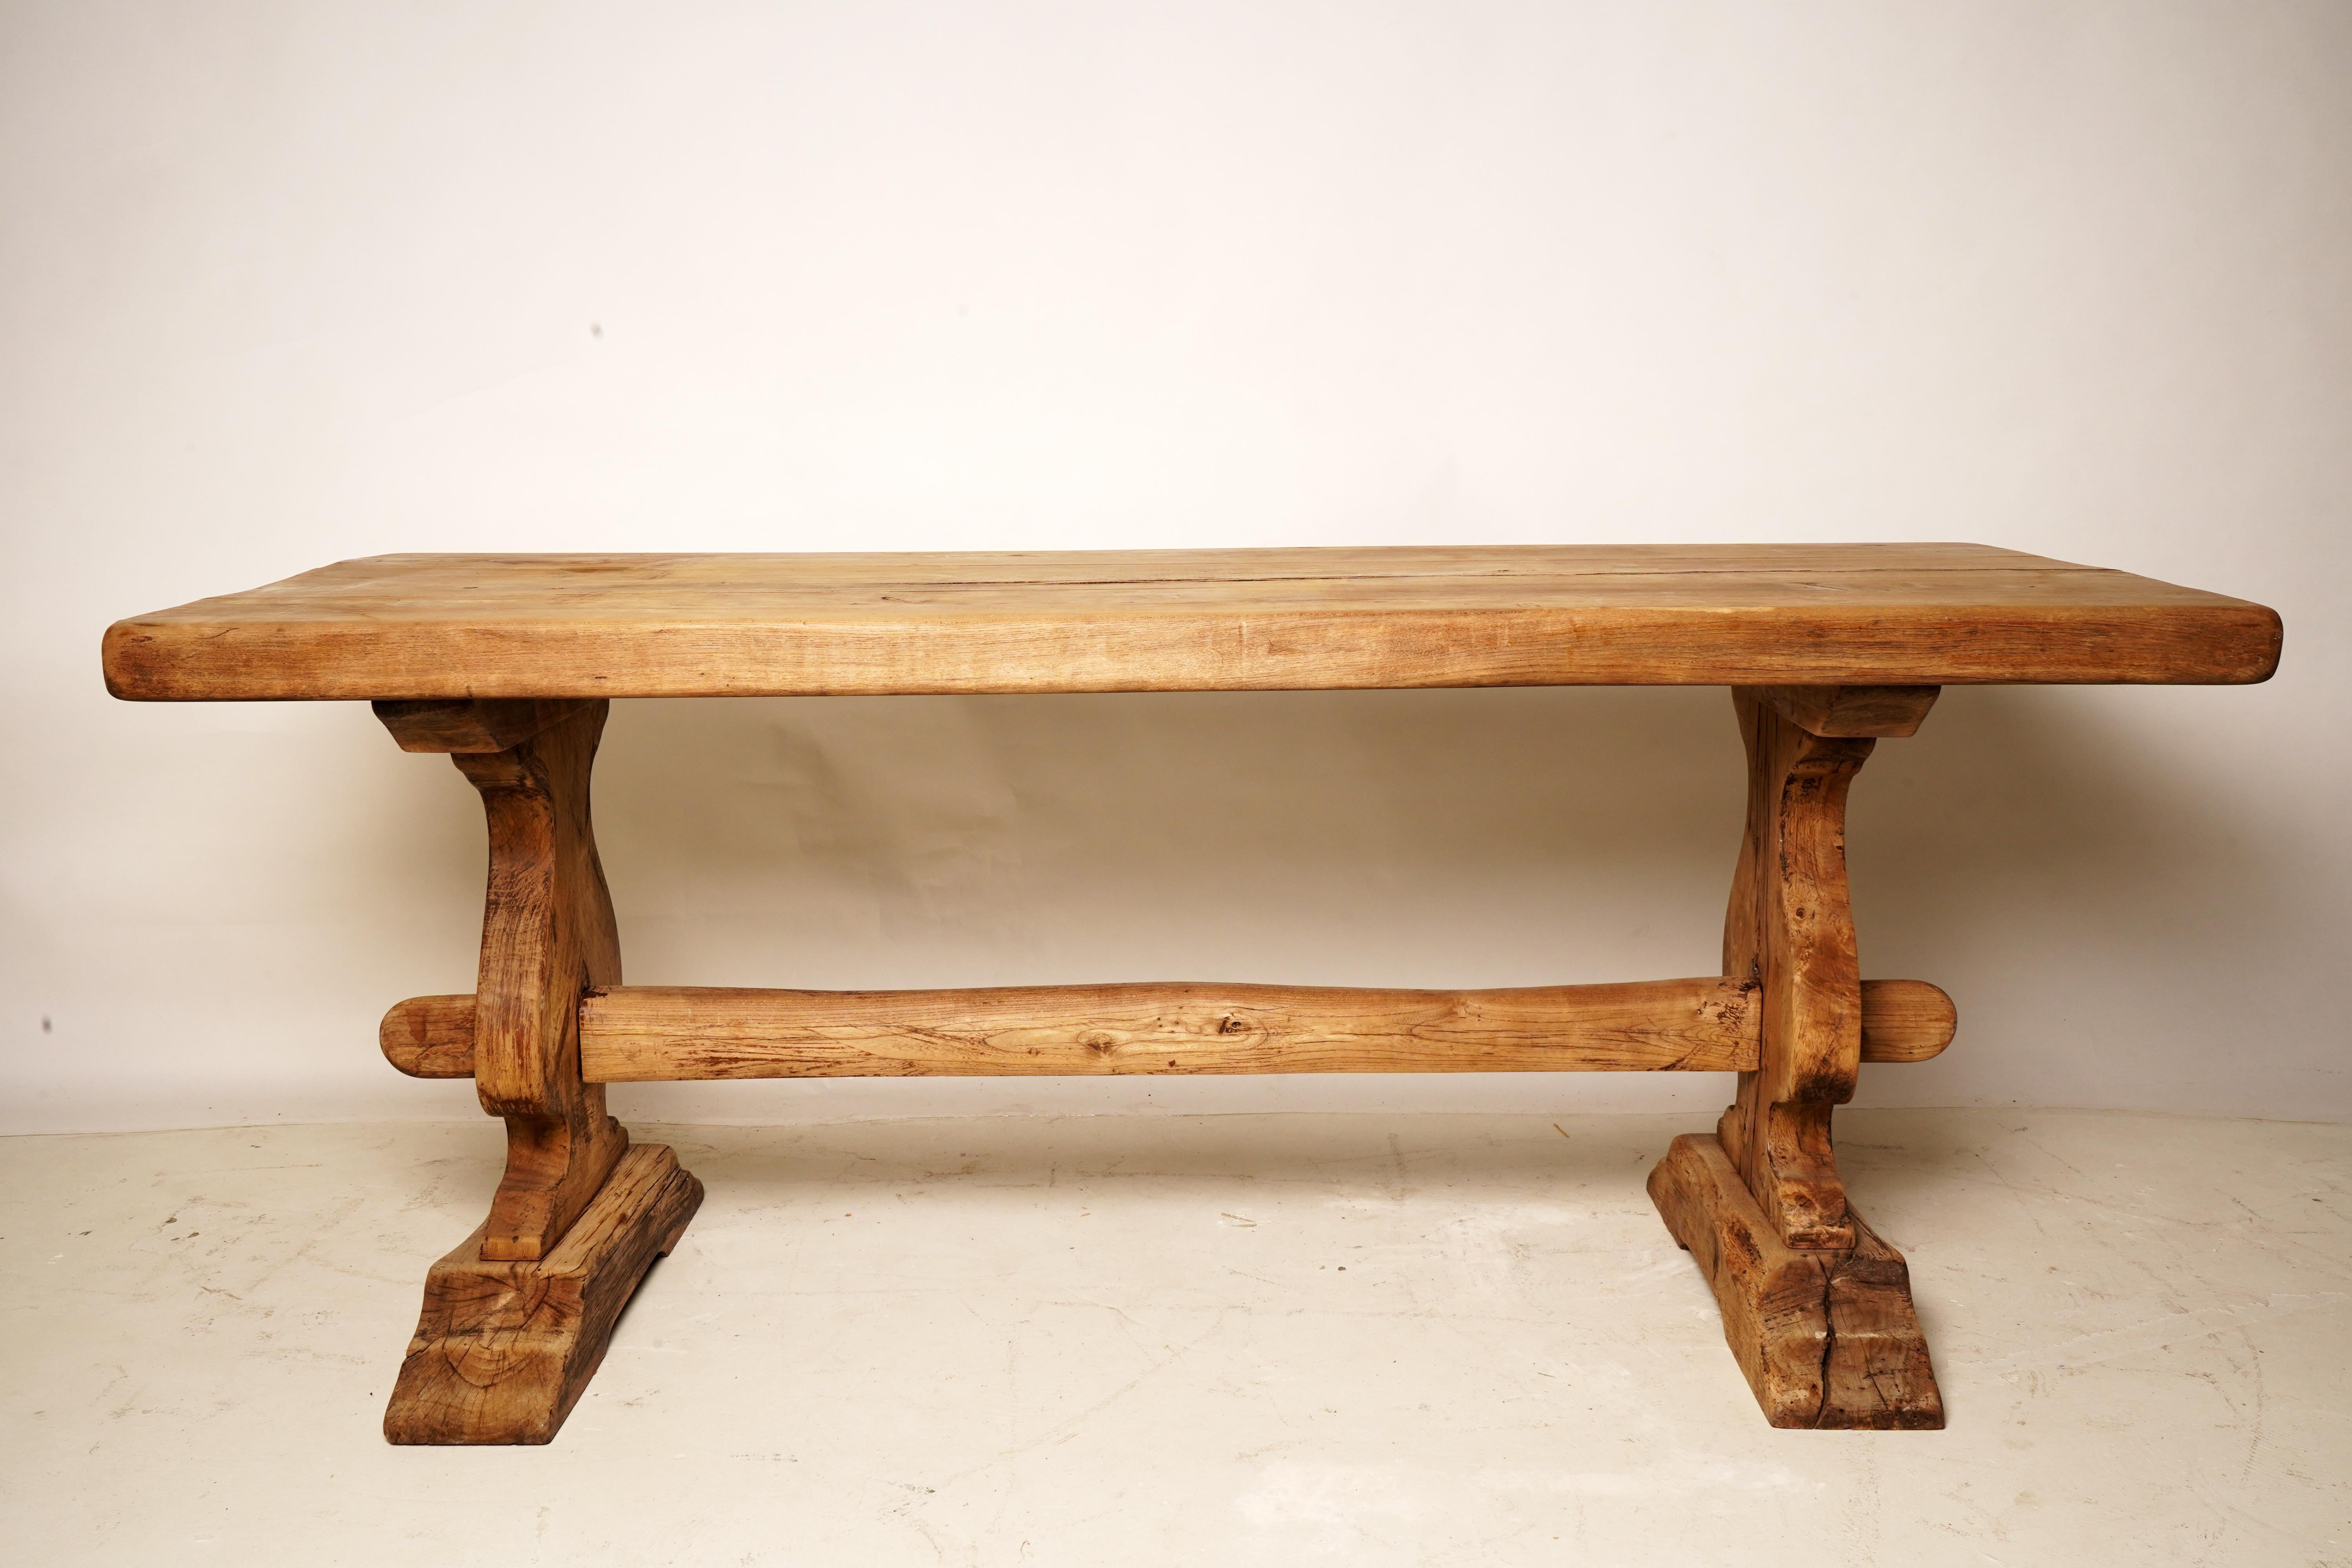 This French farm table features a 2.5